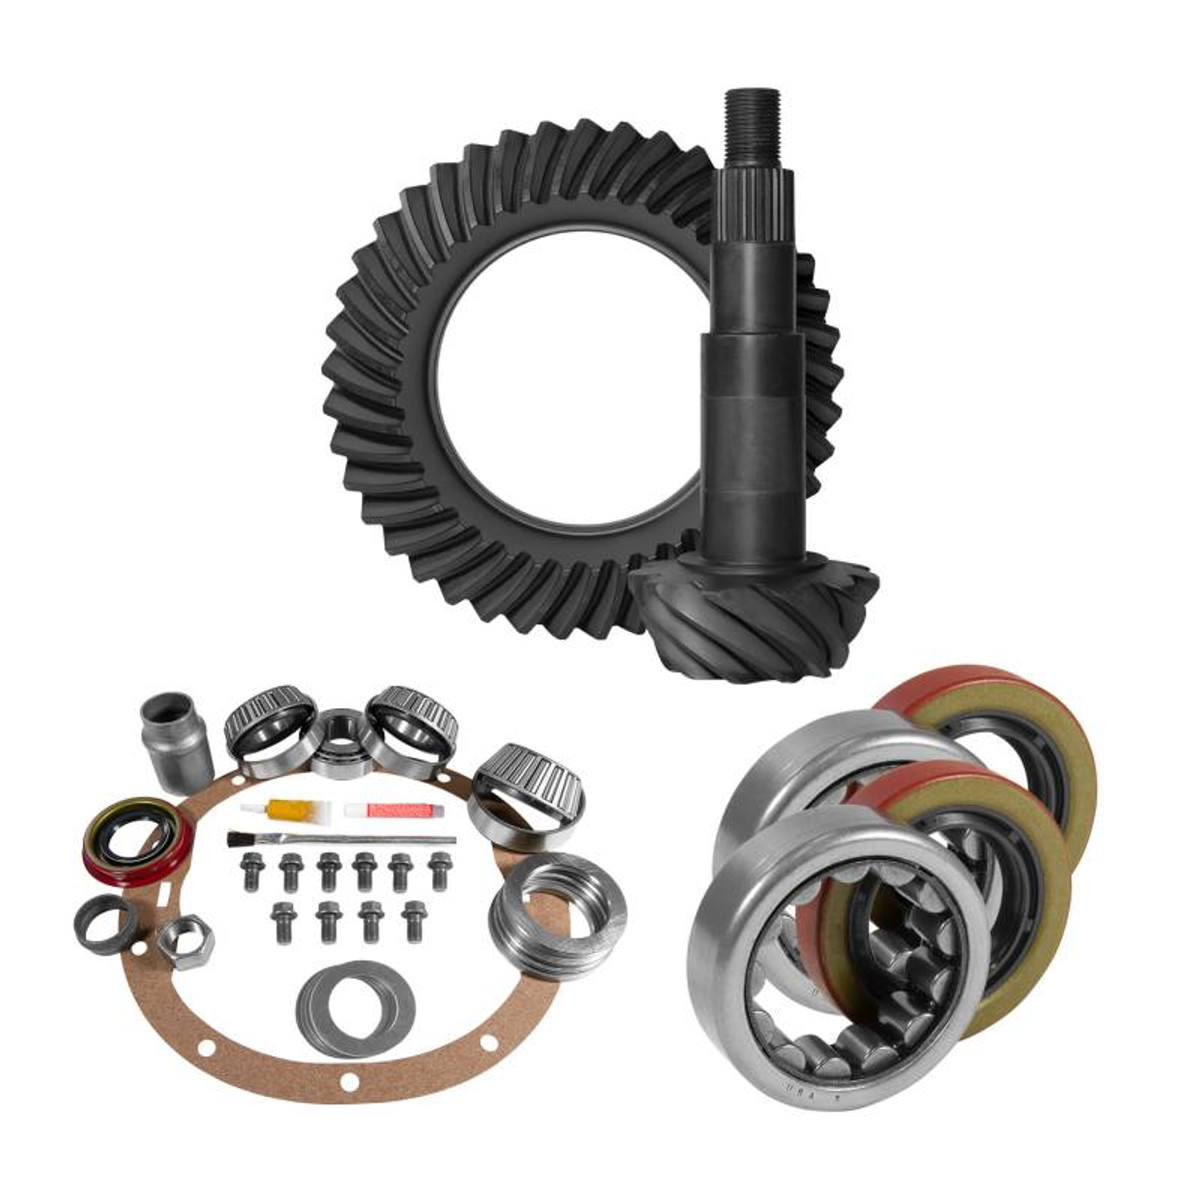 8.2 inch GM 3.55 Rear Ring and Pinion Install Kit 2.25 inch OD Axle Bearings and Seals YGK2210